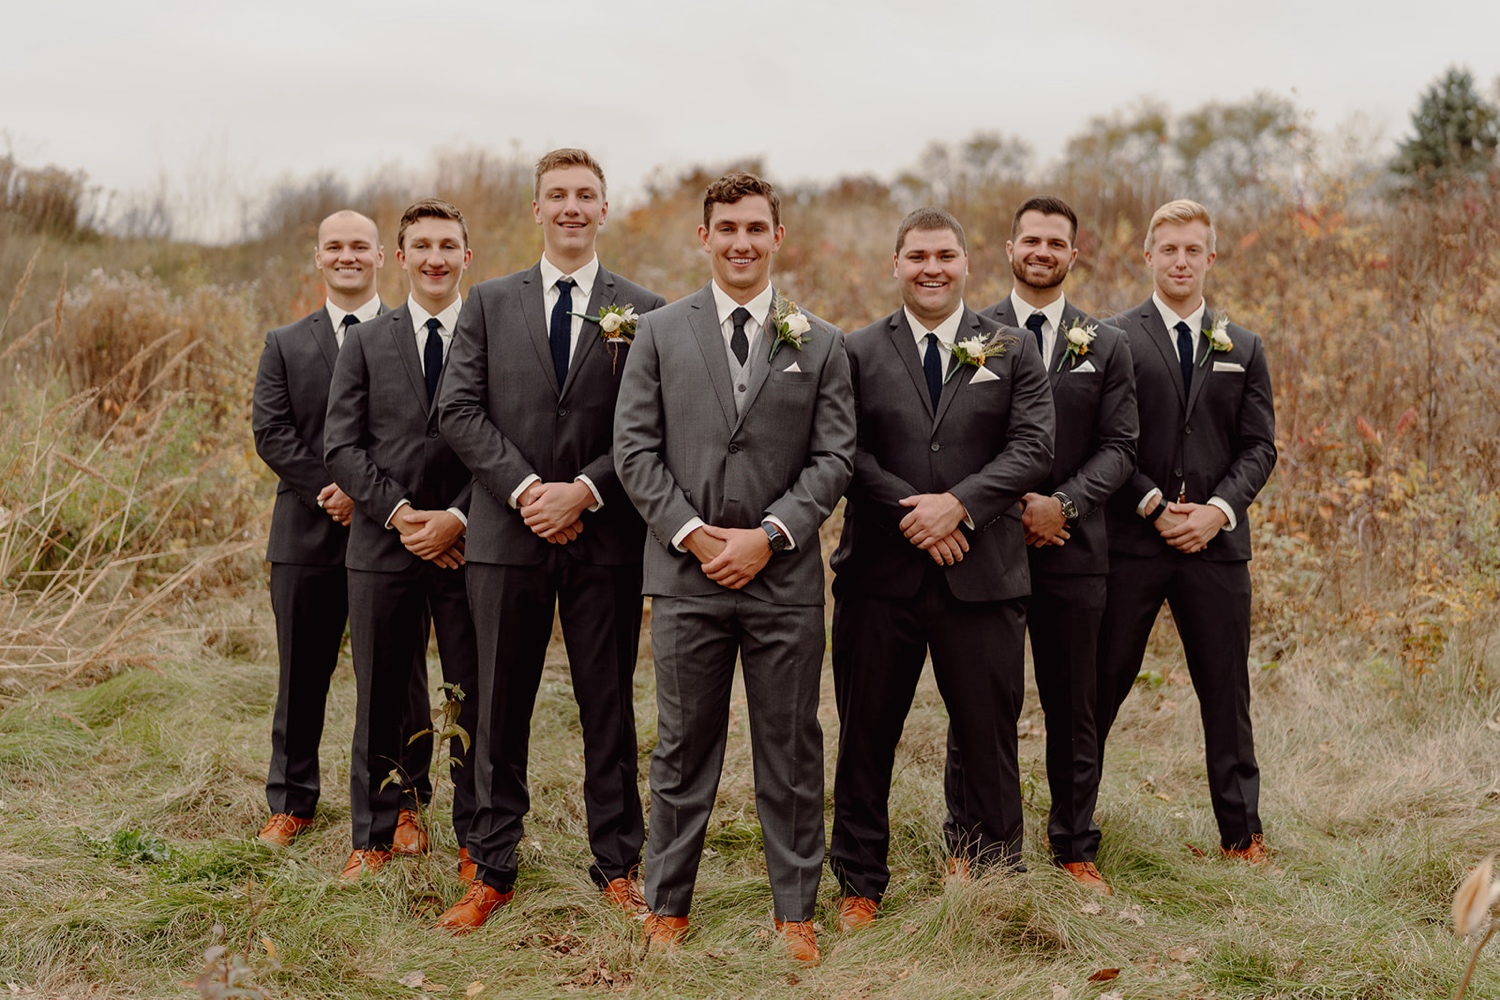 Moody navy and gold wedding party photos at Royal Golf club wedding in the fall. 